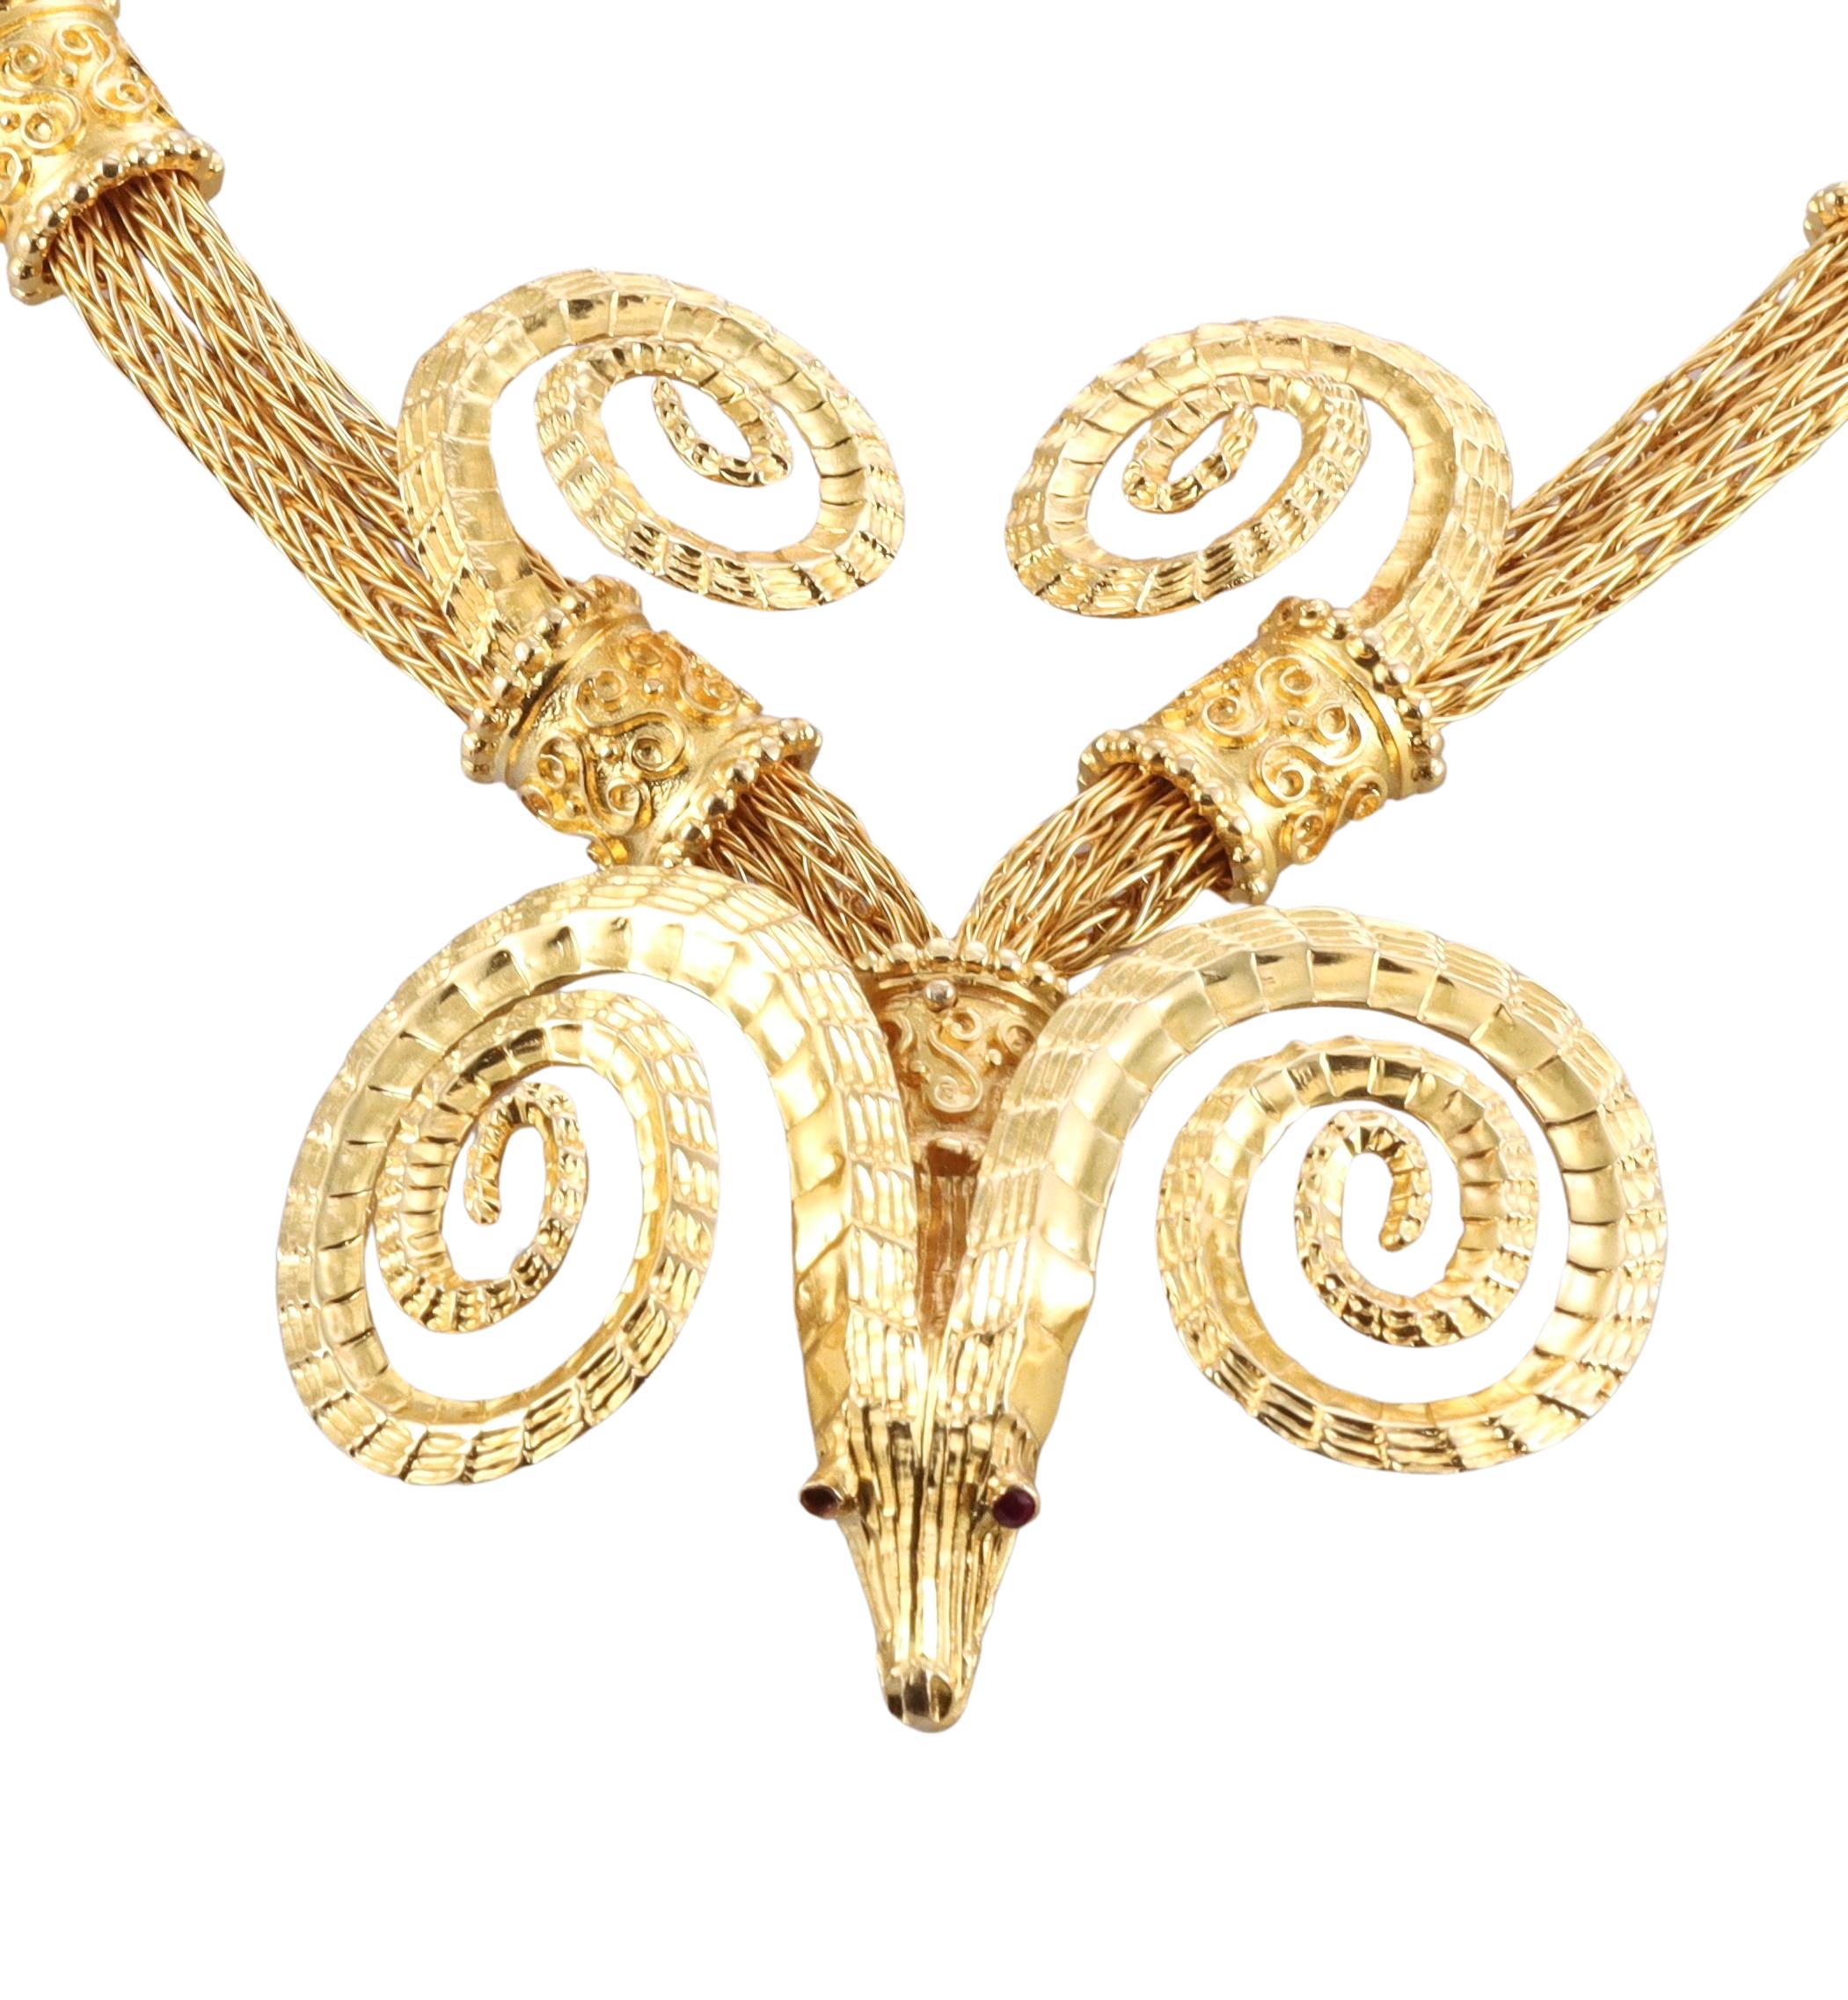 18k yellow gold necklace, by the most prominent Greek designer Ilias Lalaounis, featuring iconic design -  ram's heads. The necklace is 18